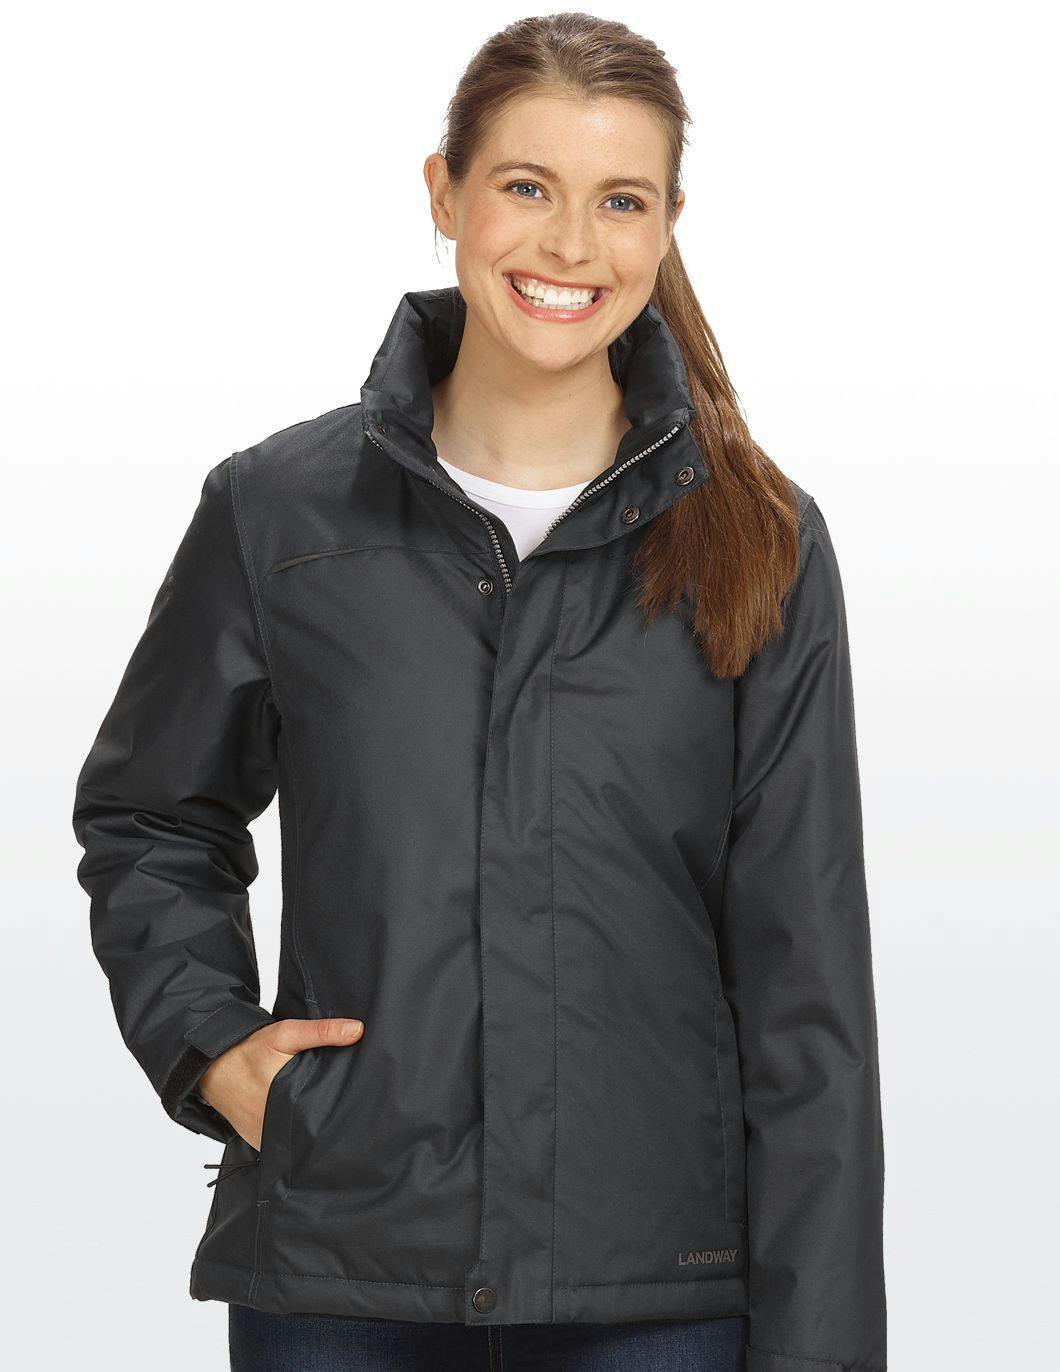 Landway-Womens-Expedition-Insulated-Jacket-Pewter